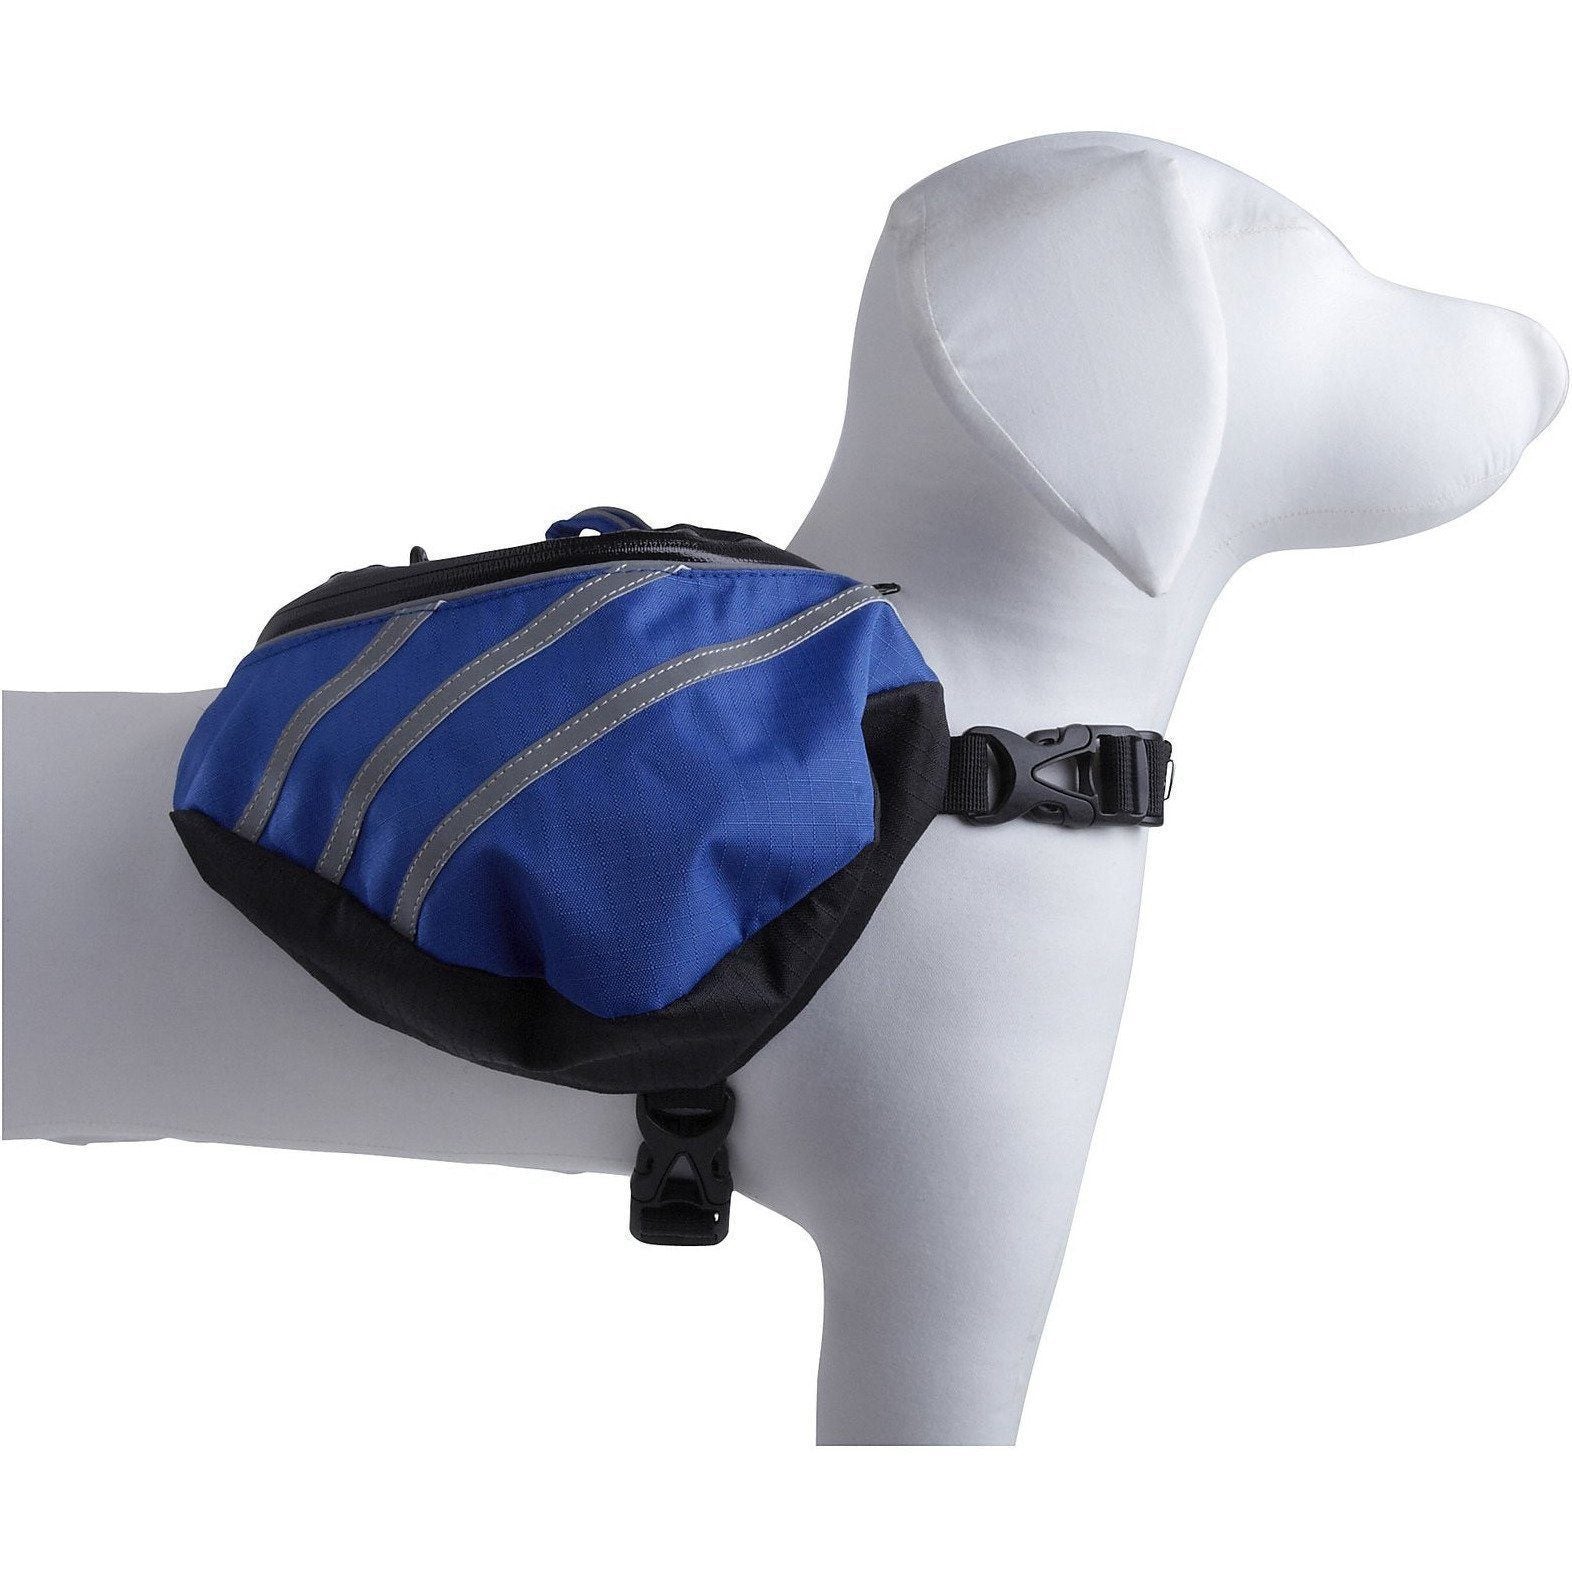 Pet Life ® 'Everest' DUPONT Waterproof Reflective Travel Fashion Designer Outdoor Camping Pet Dog Backpack Carrier X-Small Blue